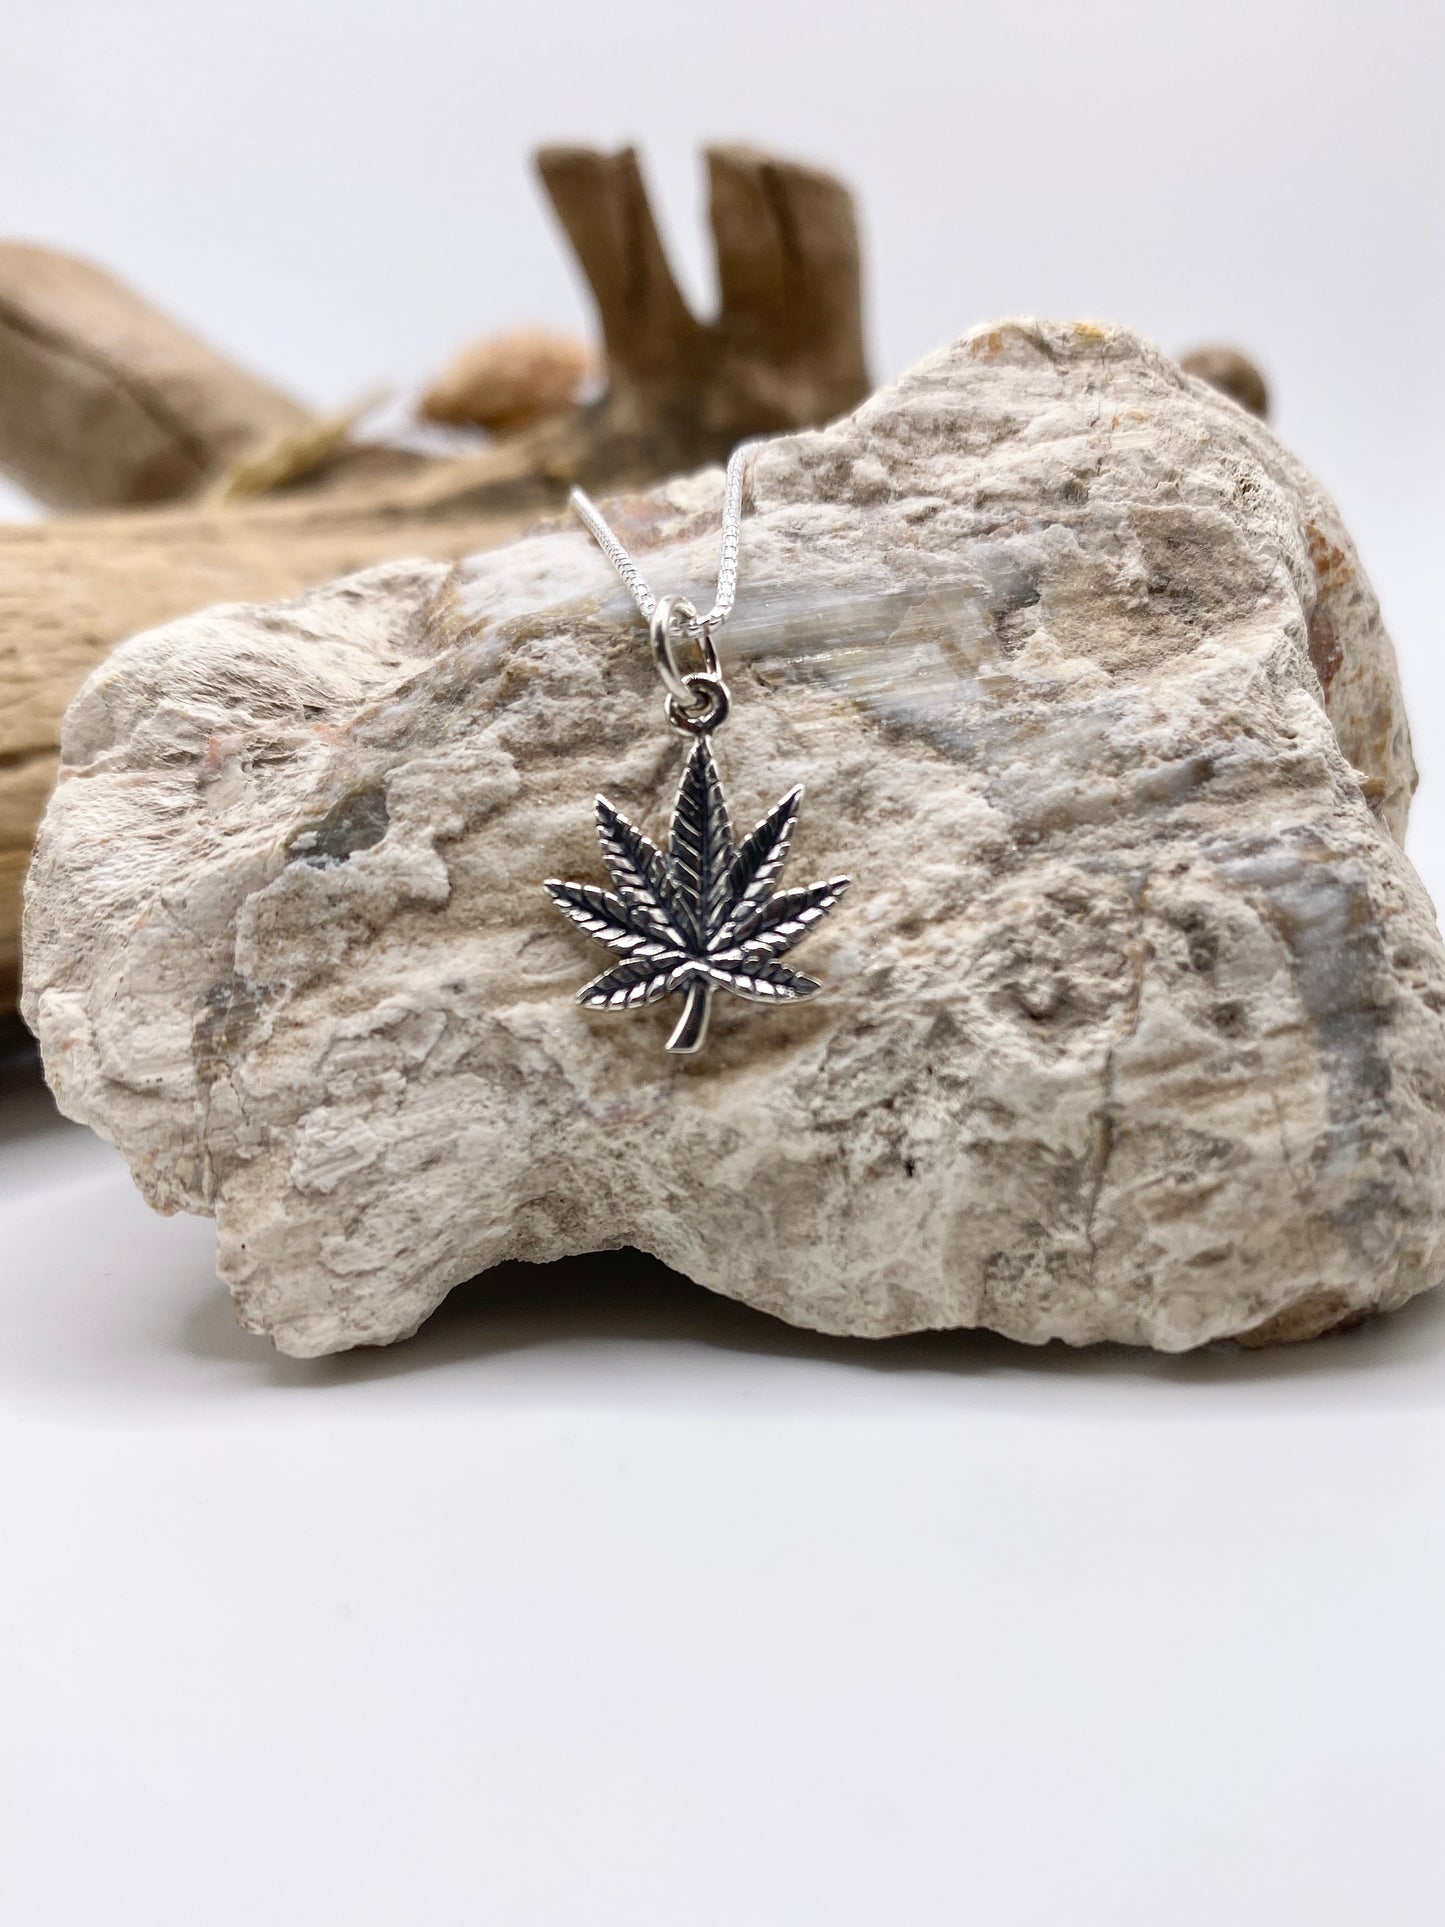 Cannabis Leaf ~ Sterling Silver Charm Necklace - Sacred Symbols Series